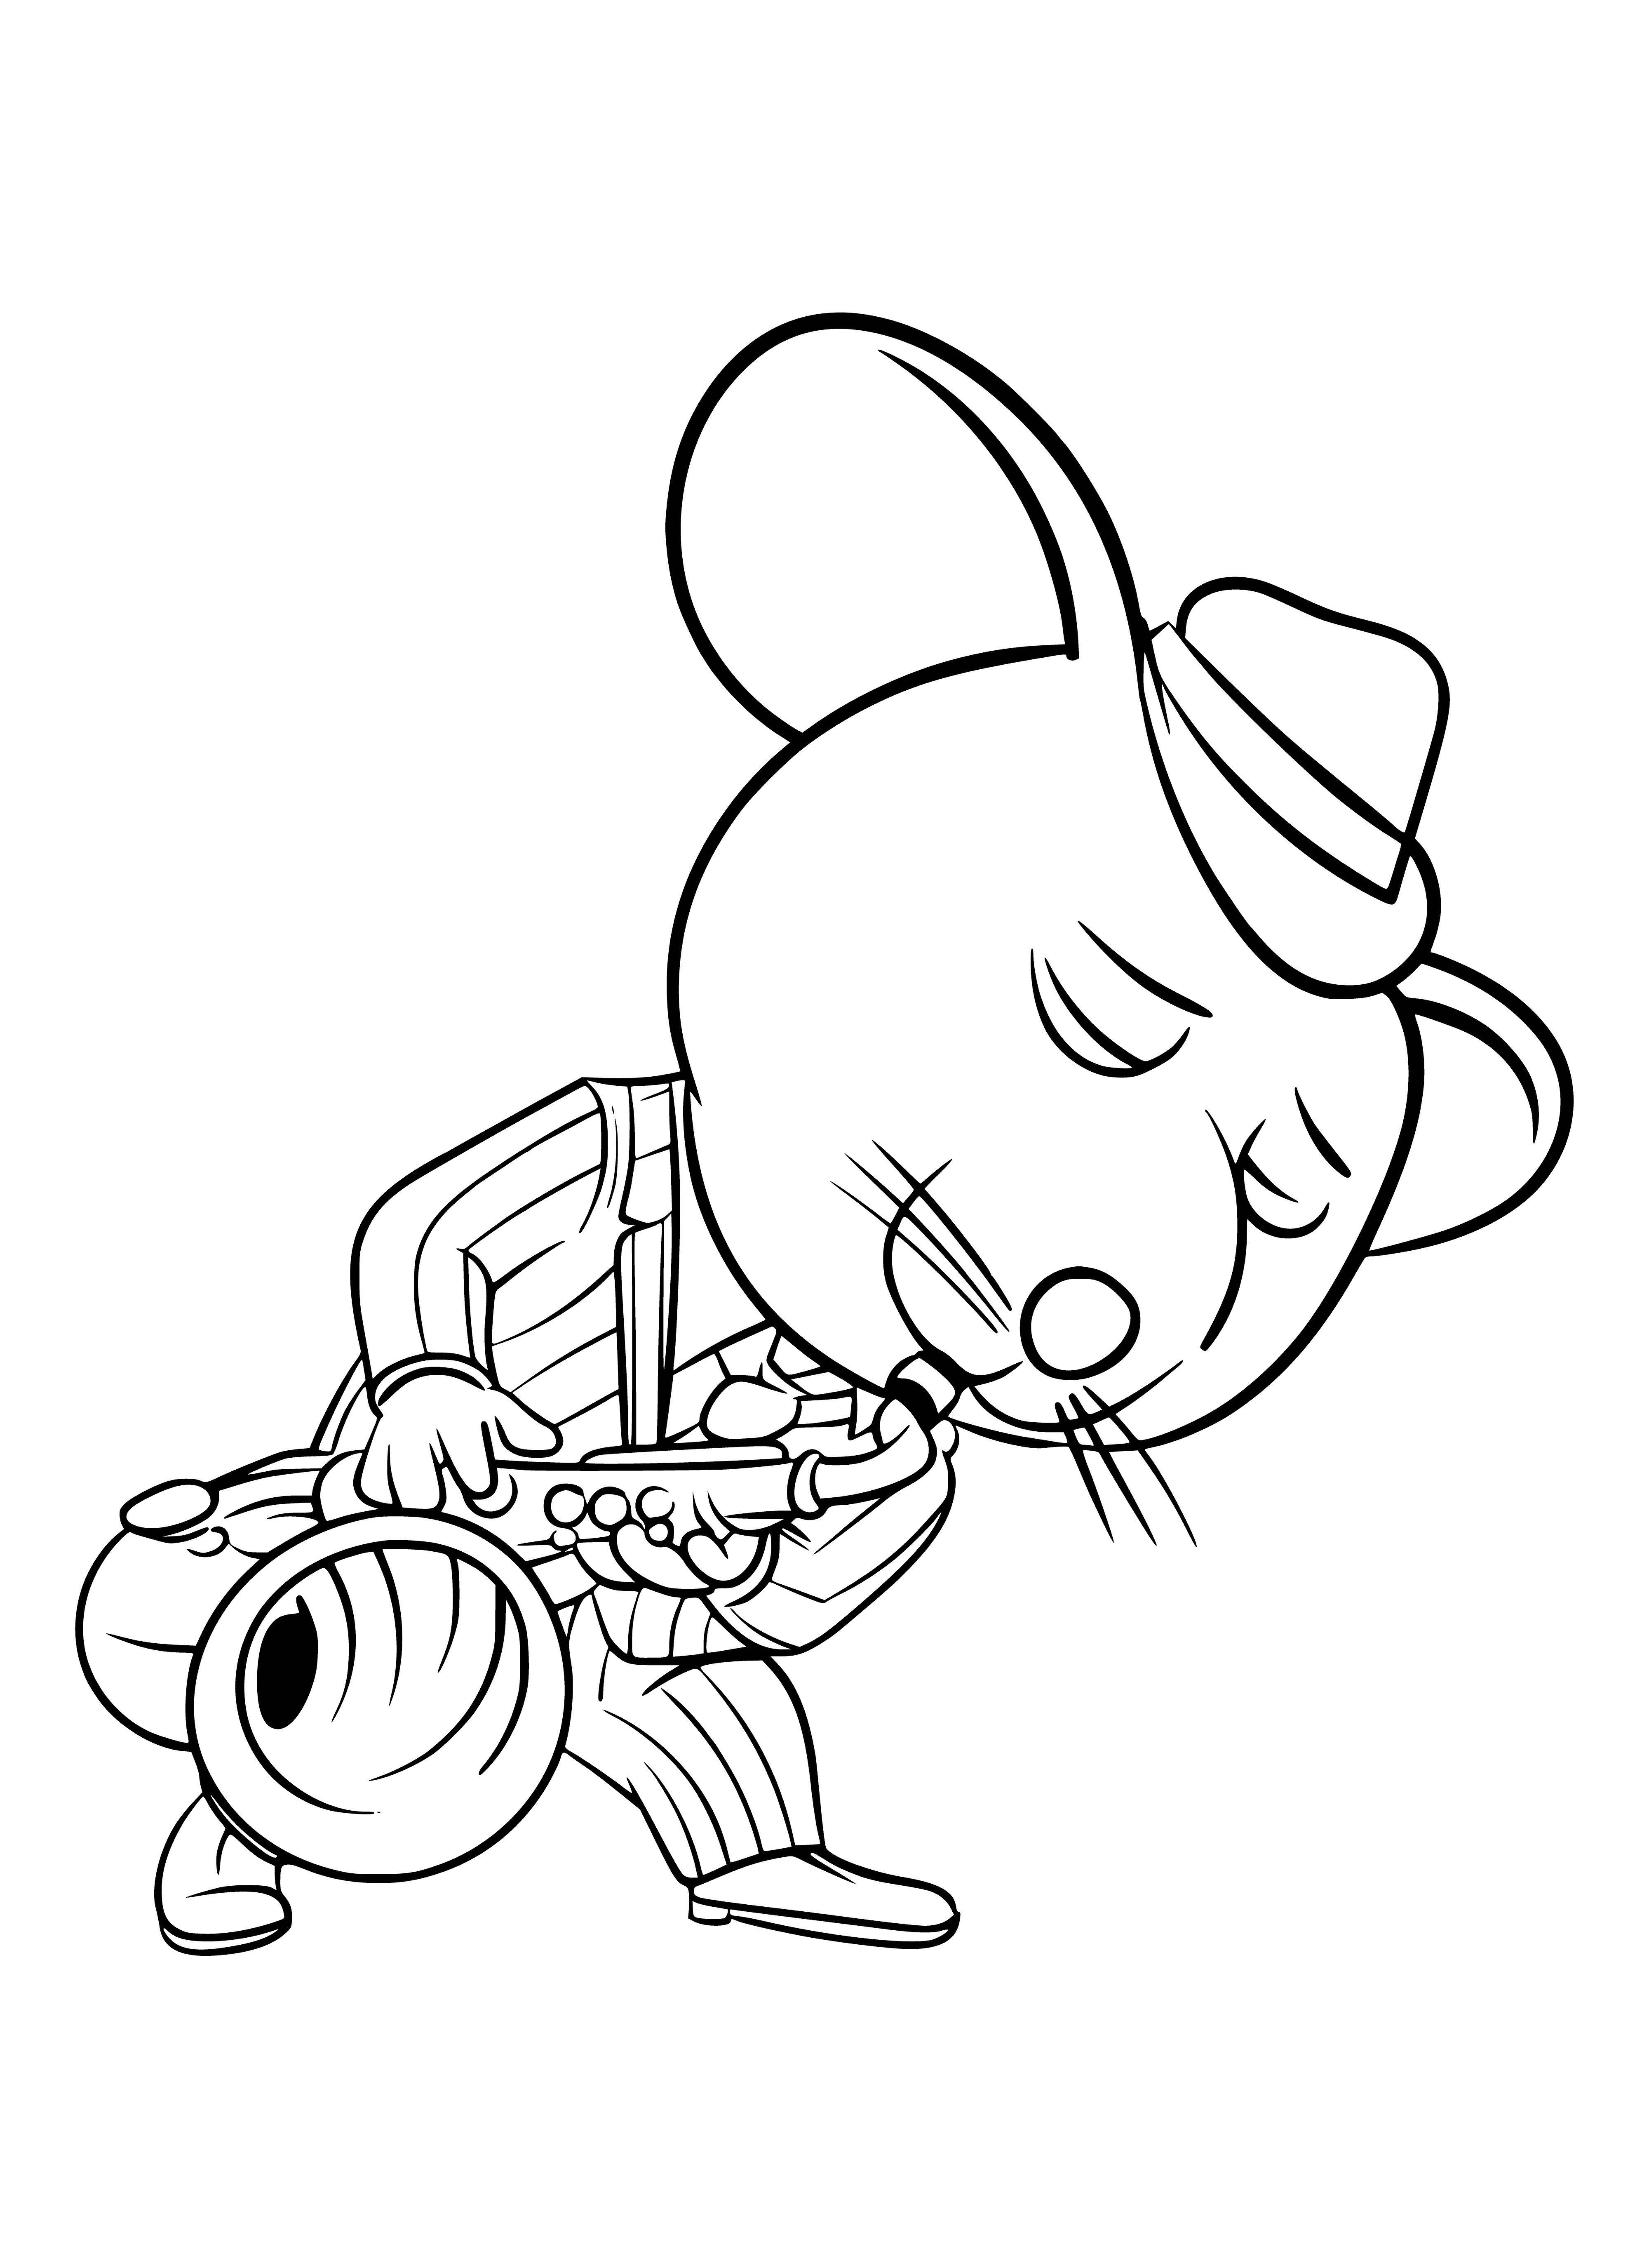 Mouse Mike coloring page